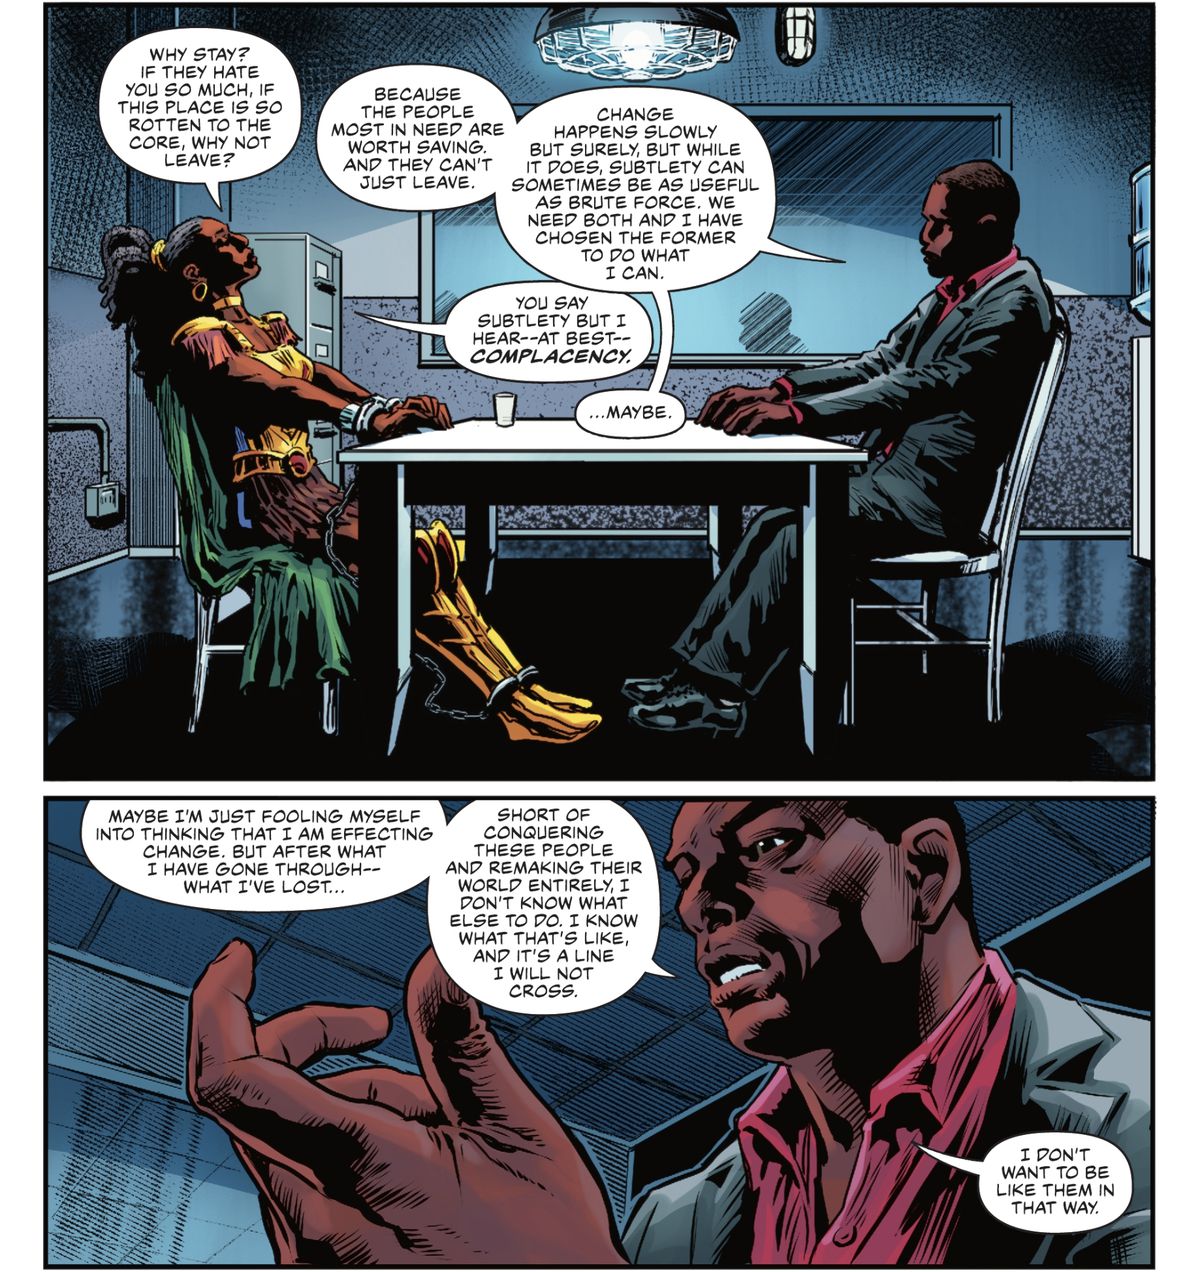 Nubia of the Amazons and the Martian Manhunter (in the form of a Black police detective) discuss why he chooses to live among humans. “Shor tof conquering these people and remakin gtheir world entirely, I don’t know what else to do,” he says. “It’s a line I will not cross. I don’t want to be like them in that way,” in Nubia: Coronation Special #1 (2022). 